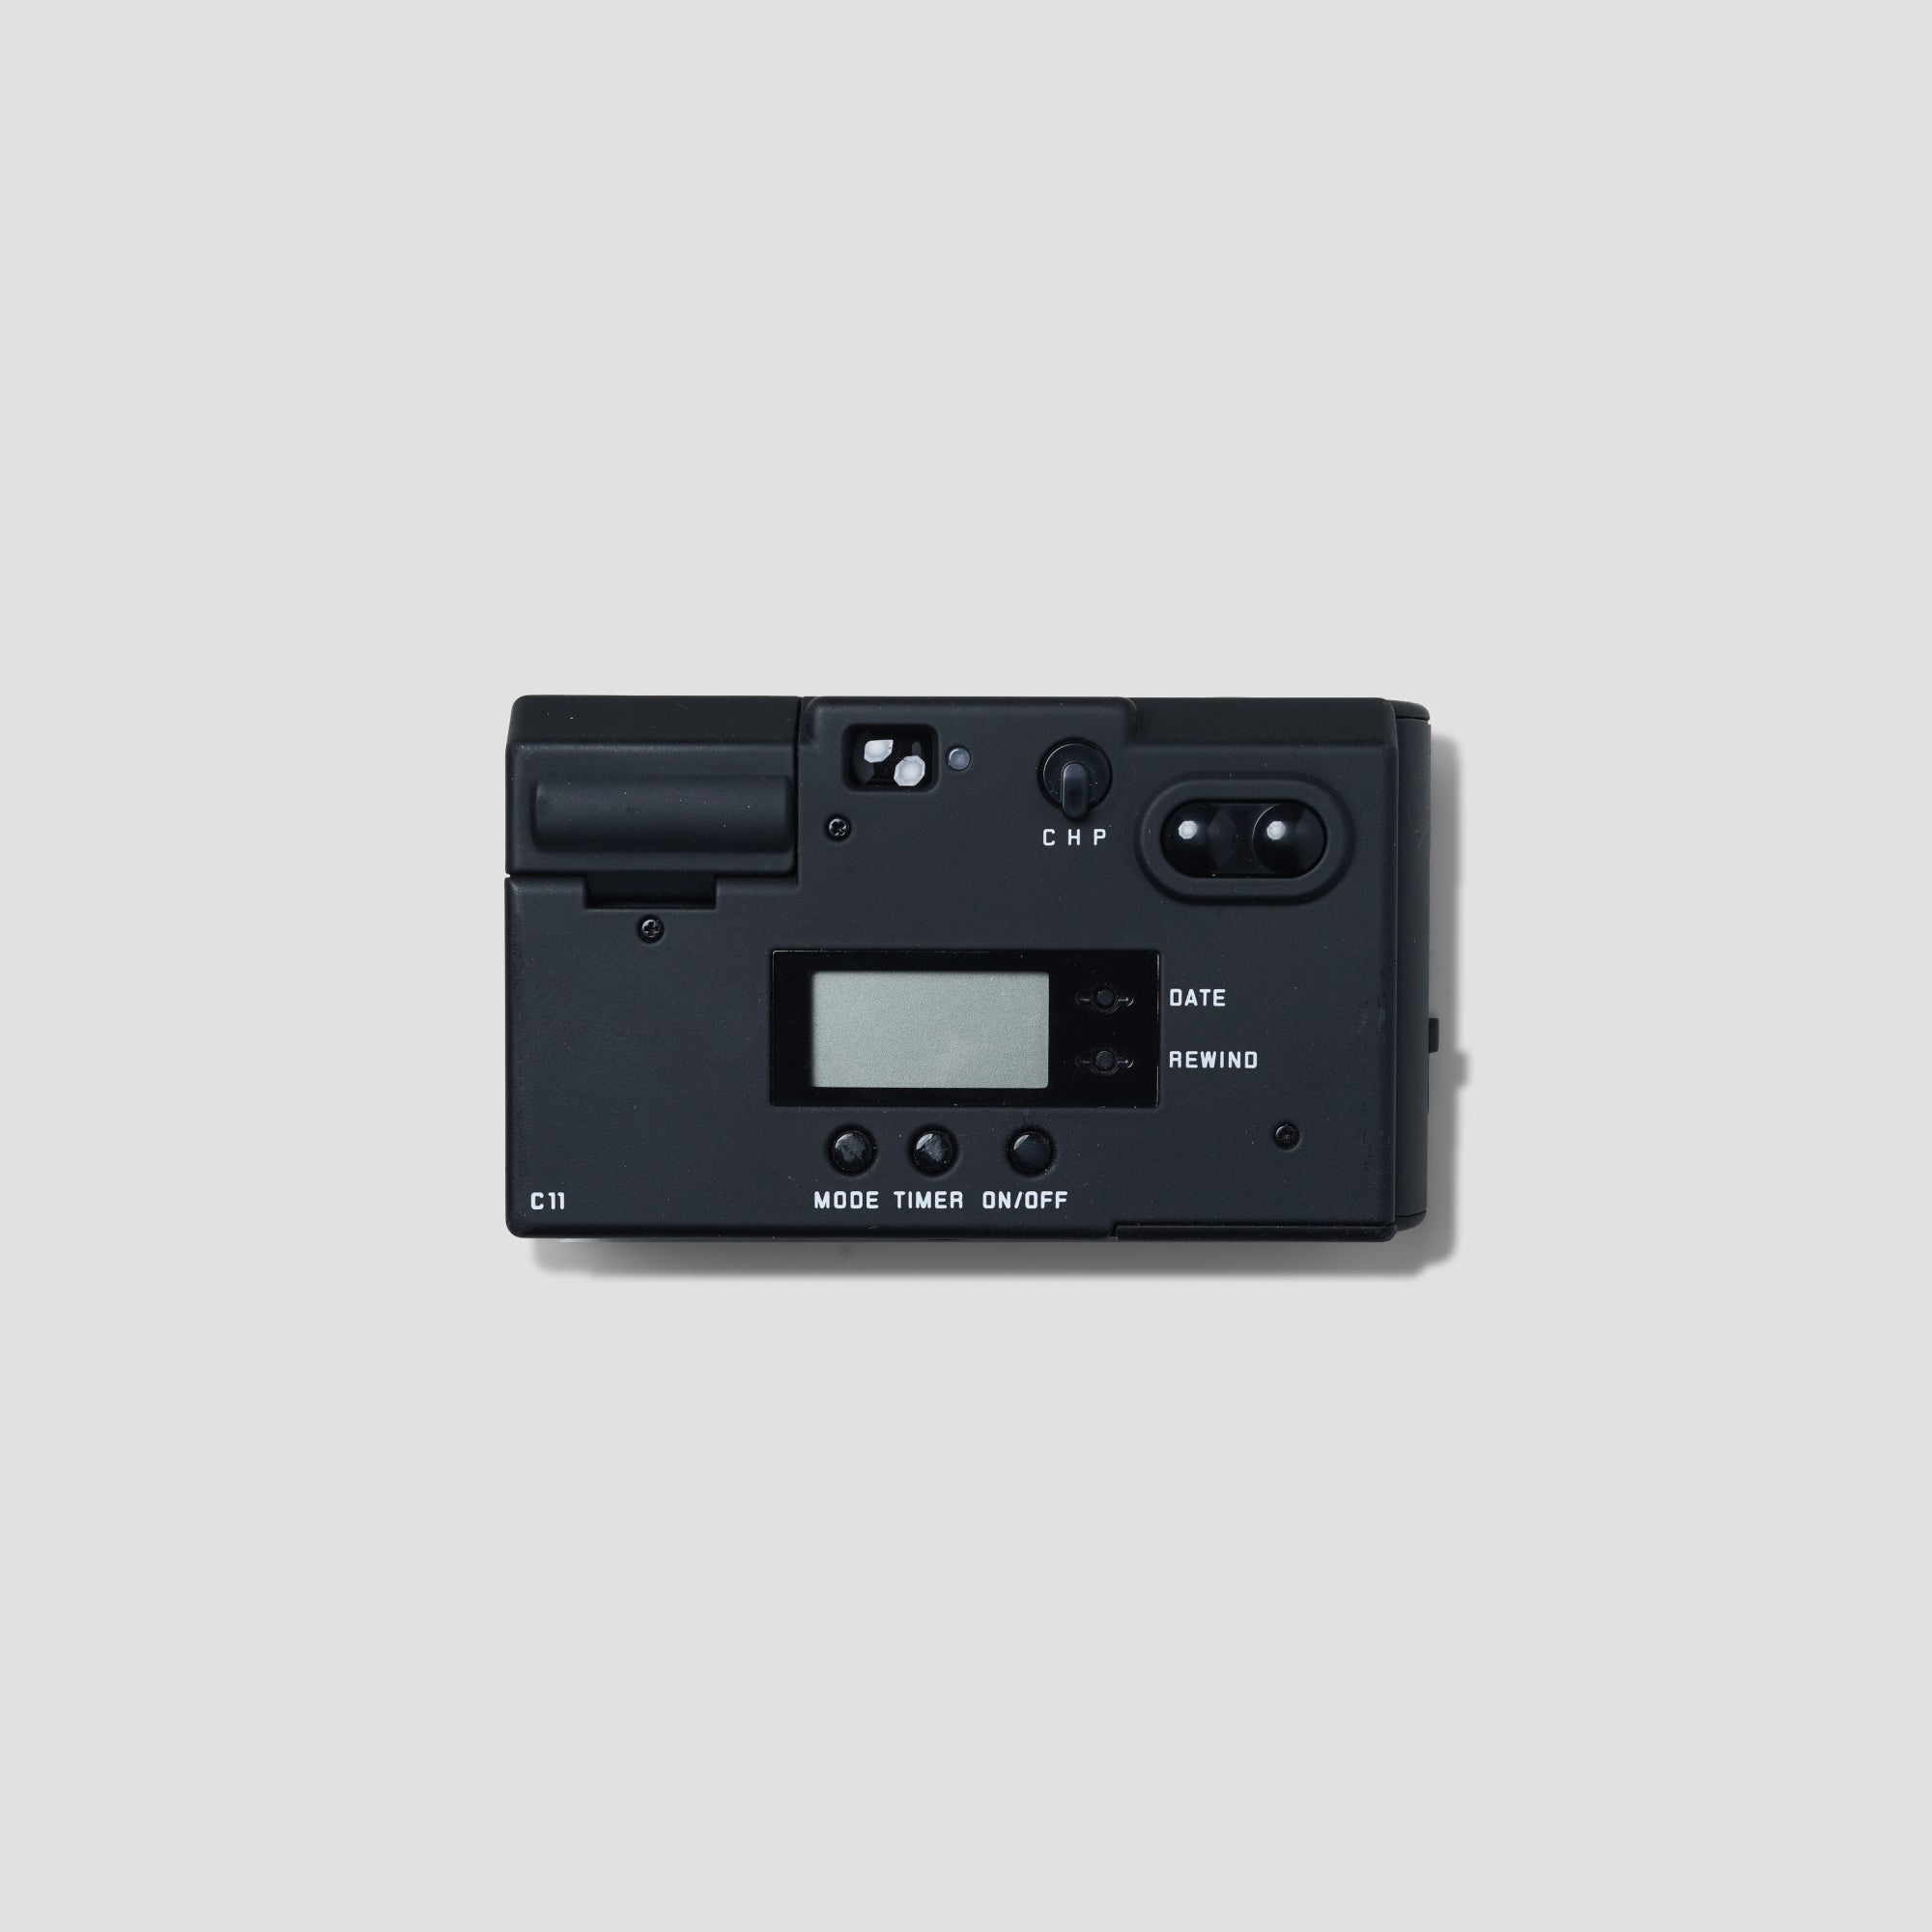 Buy Leica C11 Black now at Analogue Amsterdam